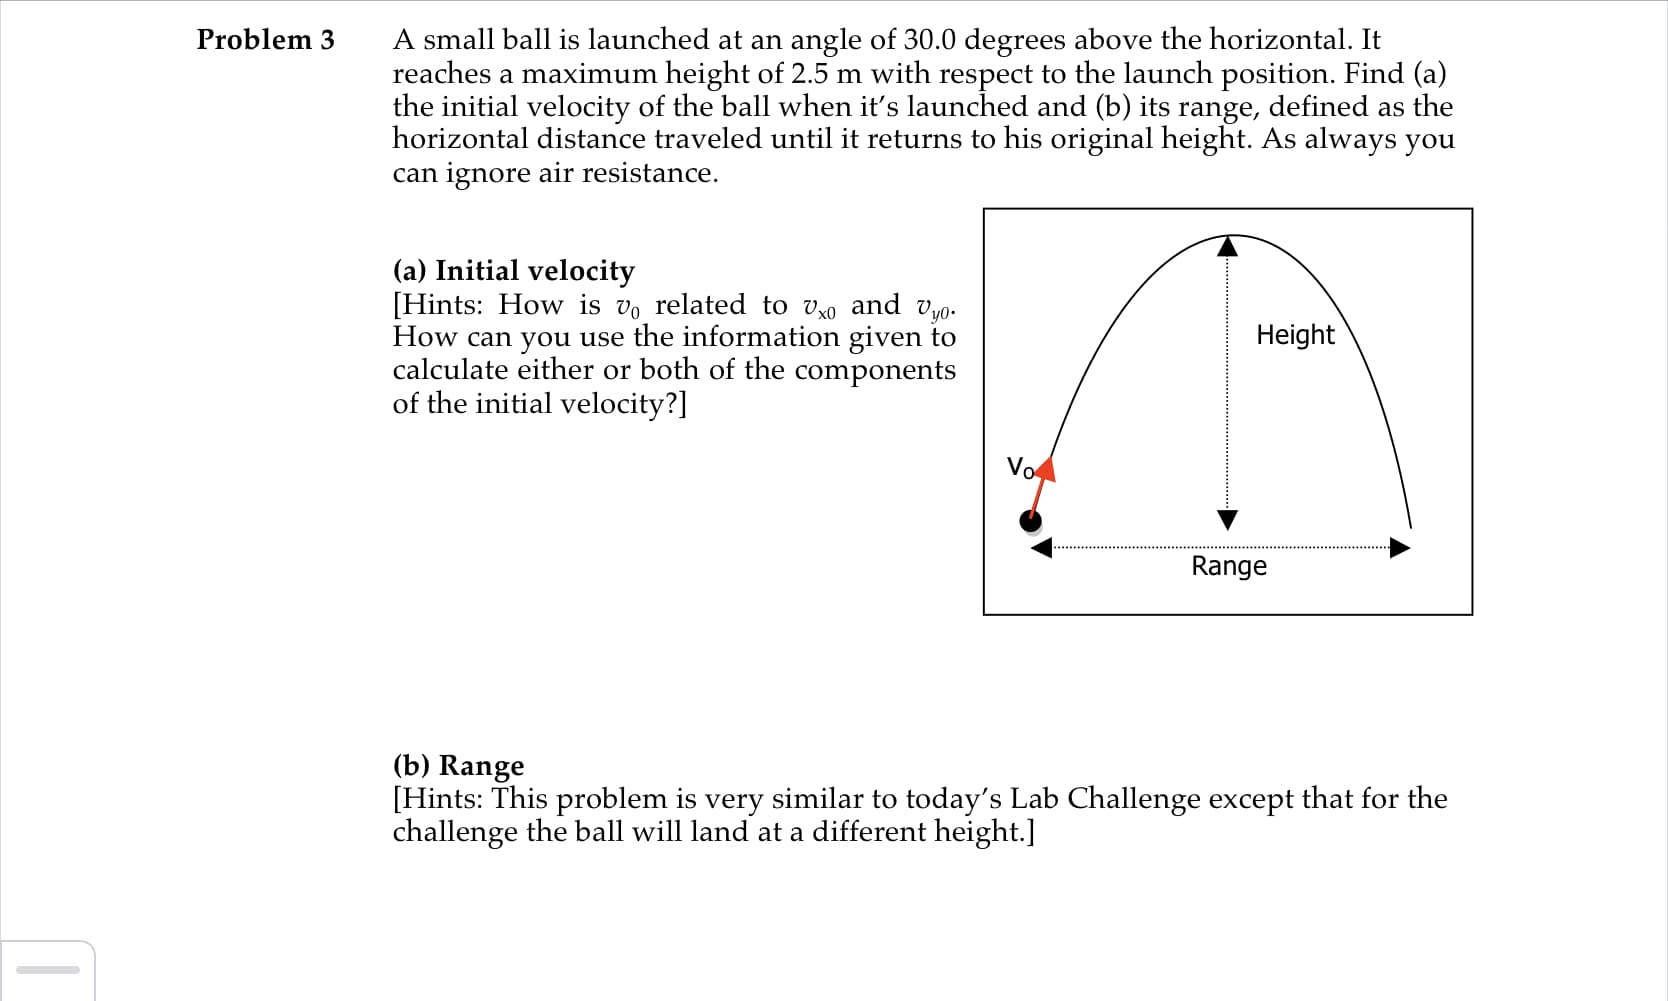 A small ball is launched at an angle of 30.0 degrees above the horizontal. It
reaches a maximum height of 2.5 m with respect to the launch position. Find (a)
the initial velocity of the ball when it's launched and (b) its range, defined as the
horizontal distance traveled until it returns to his original height. As always you
can ignore air resistance.
Problem 3
(a) Initial velocity
[Hints: How is vo related to vxo and vy0-
How can you use the information given to
calculate either or both of the components
of the initial velocity?]
Height
Vo
Range
(b) Range
[Hints: This problem is very similar to today's Lab Challenge except that for the
challenge the ball will land at a different height.]
